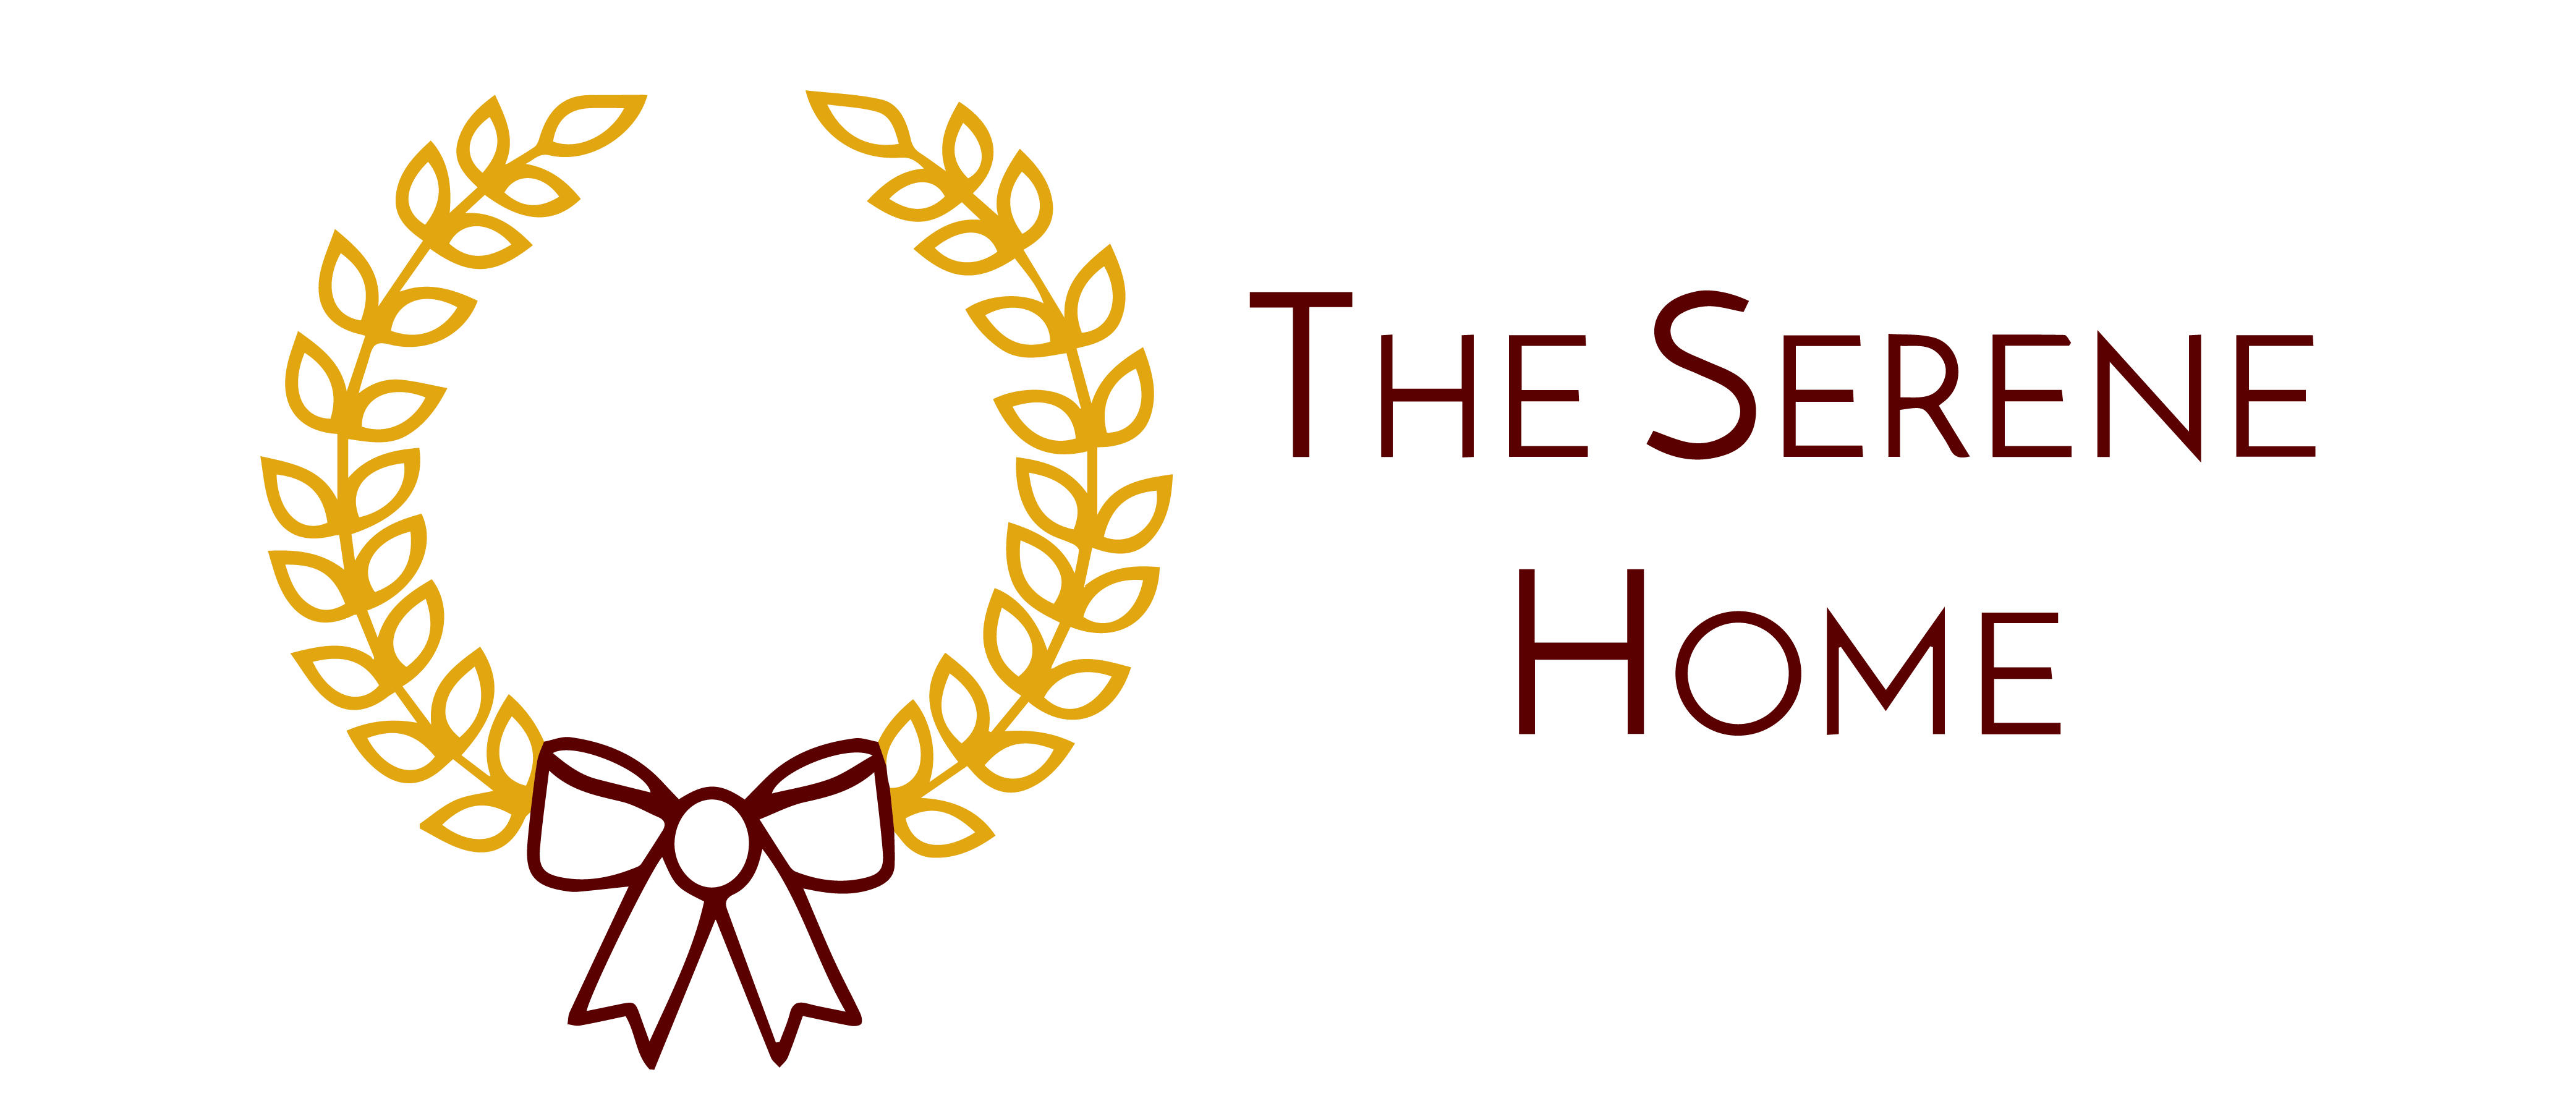 Golden laurel wreath with a bow and the text "the serene home" in a formal font.